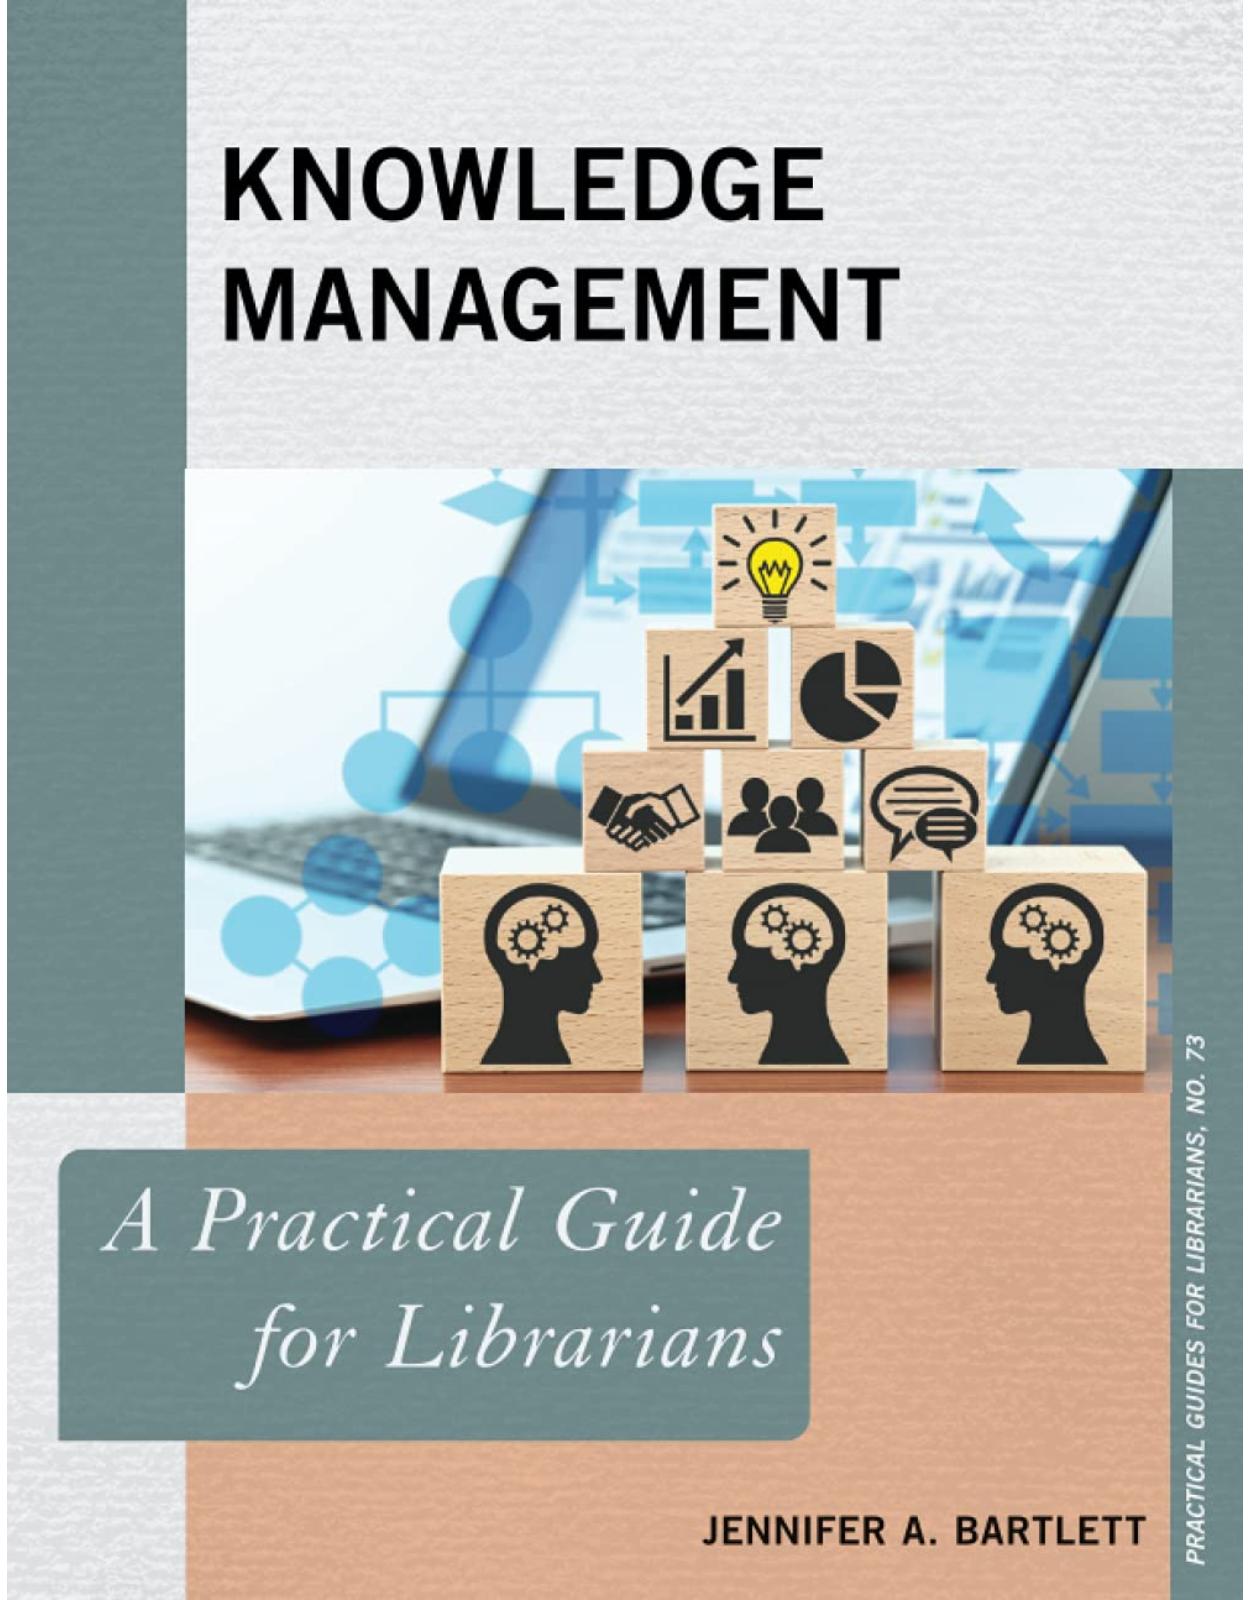 Knowledge Management: A Practical Guide for Librarians: 73 (Practical Guides for Librarians)